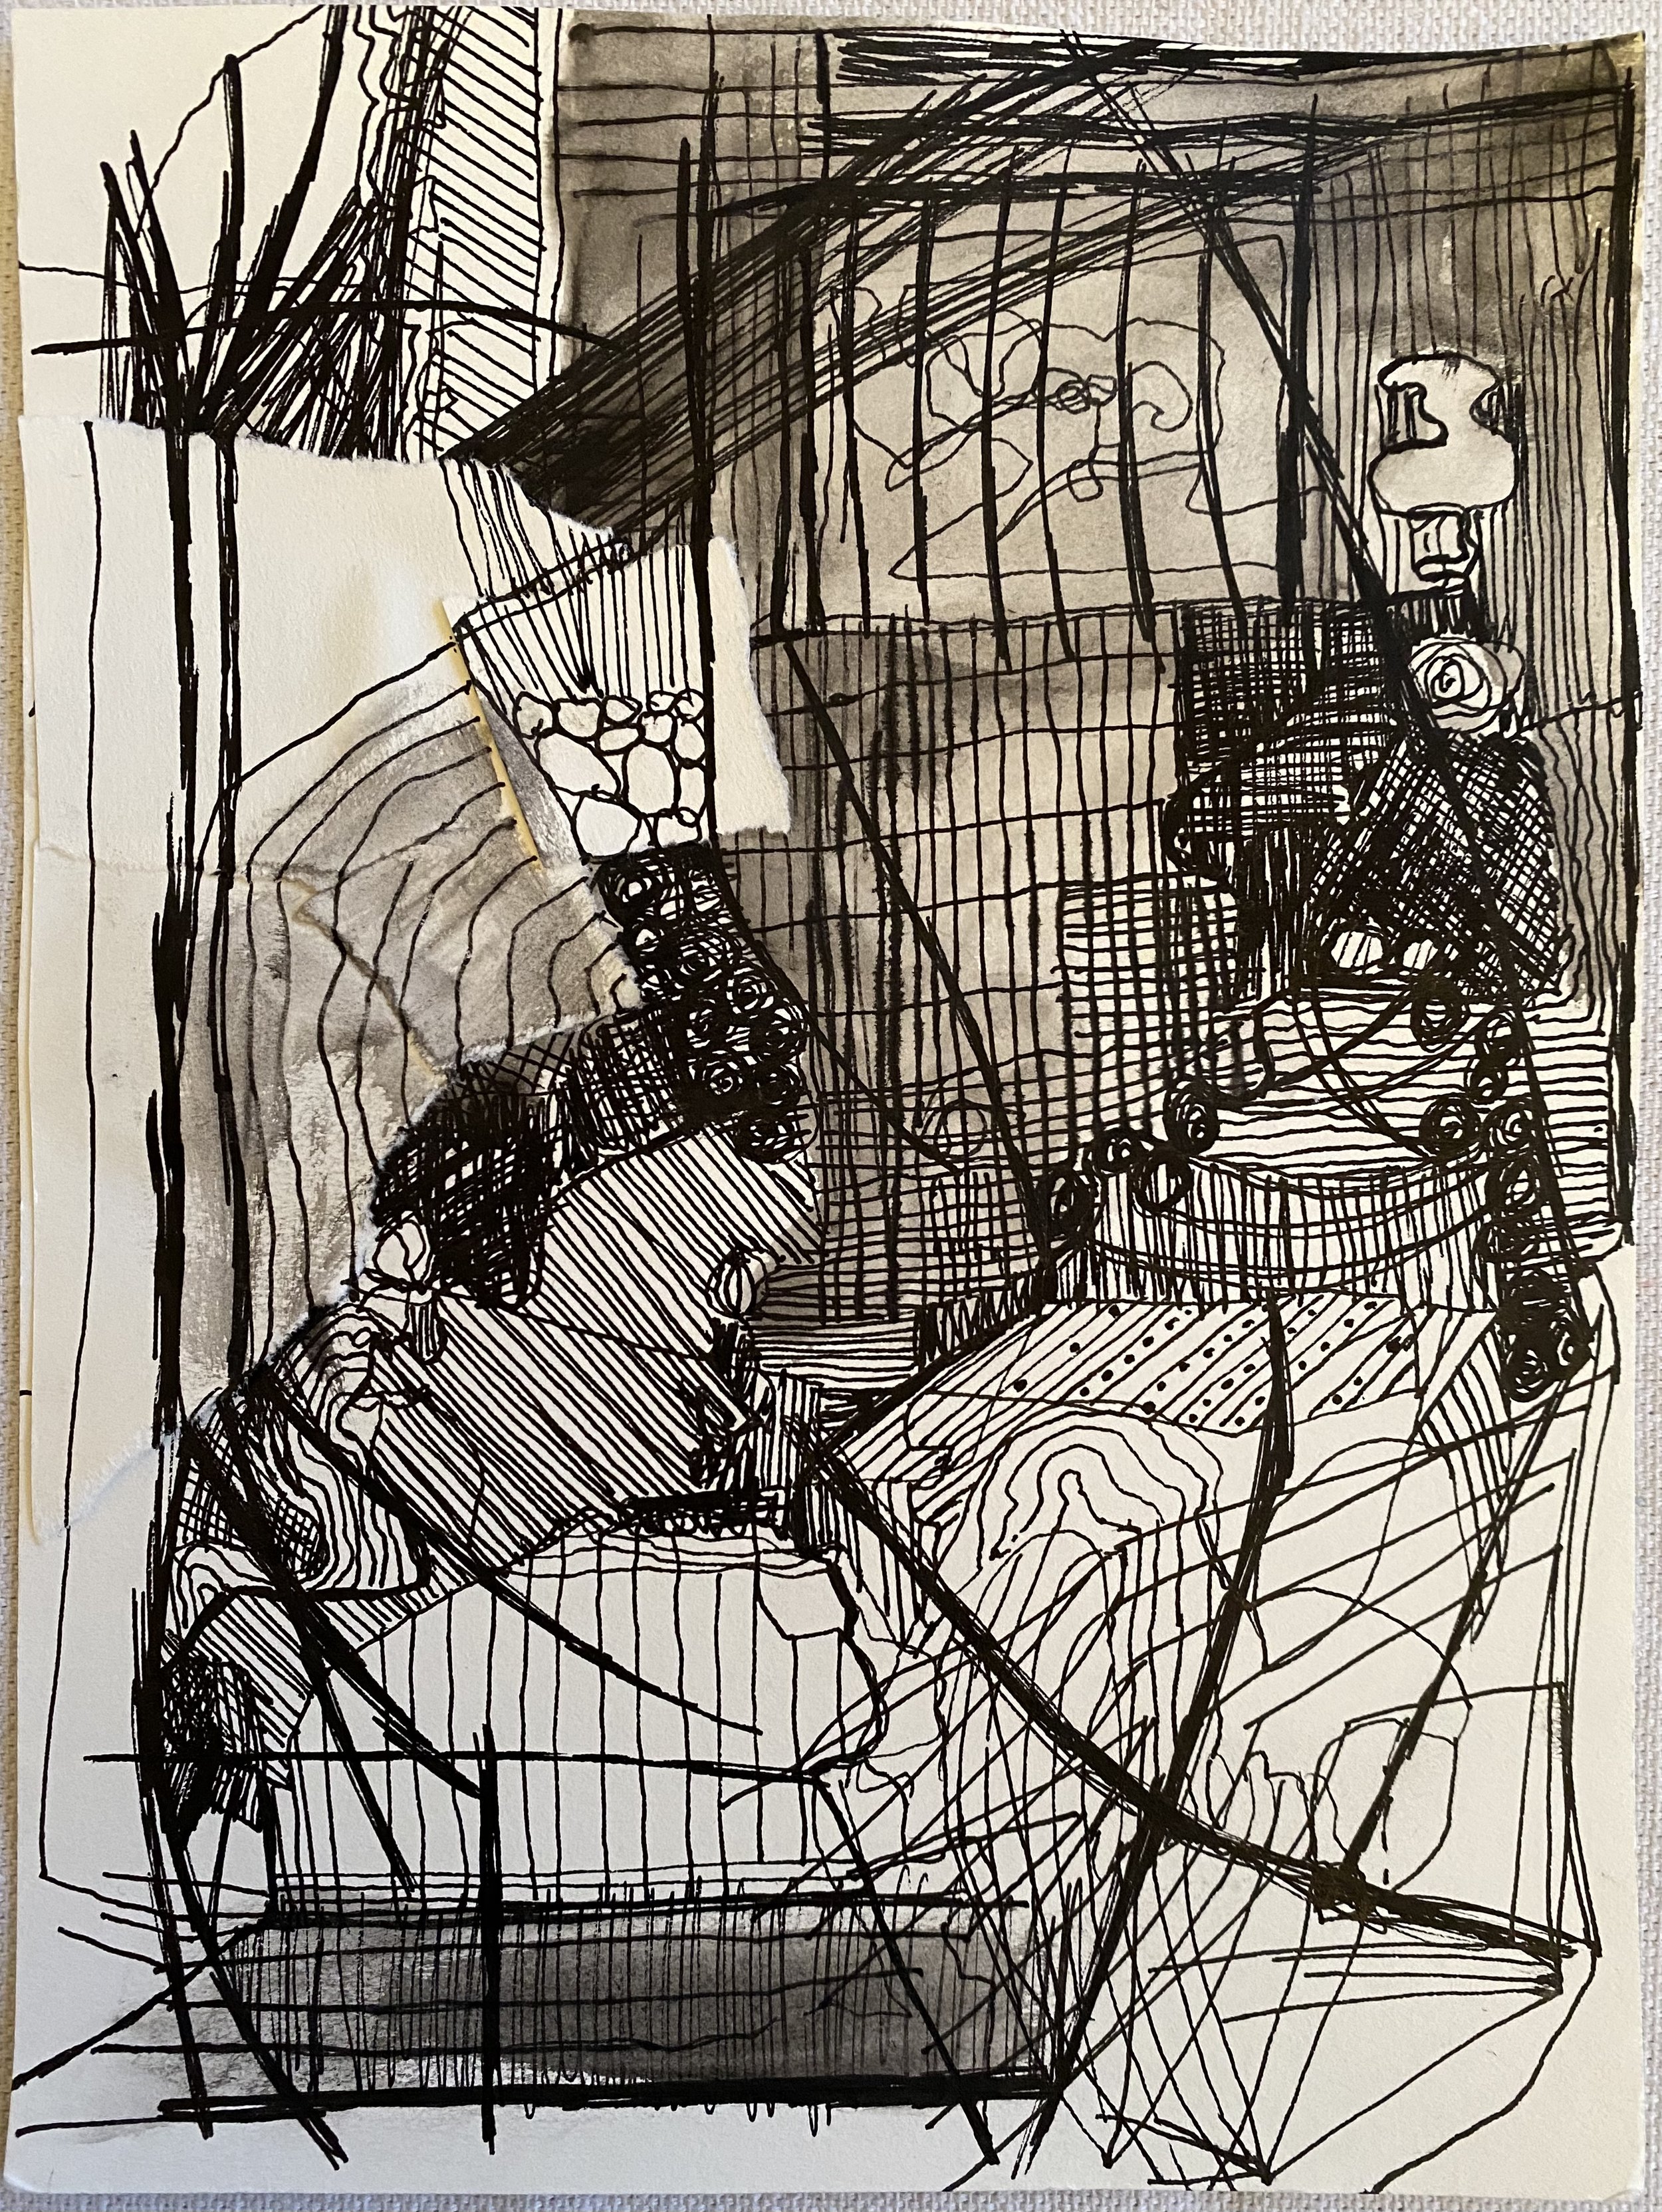 While Bartley Plays Piano, 2021 8x6 inches, ink on paper, with glue